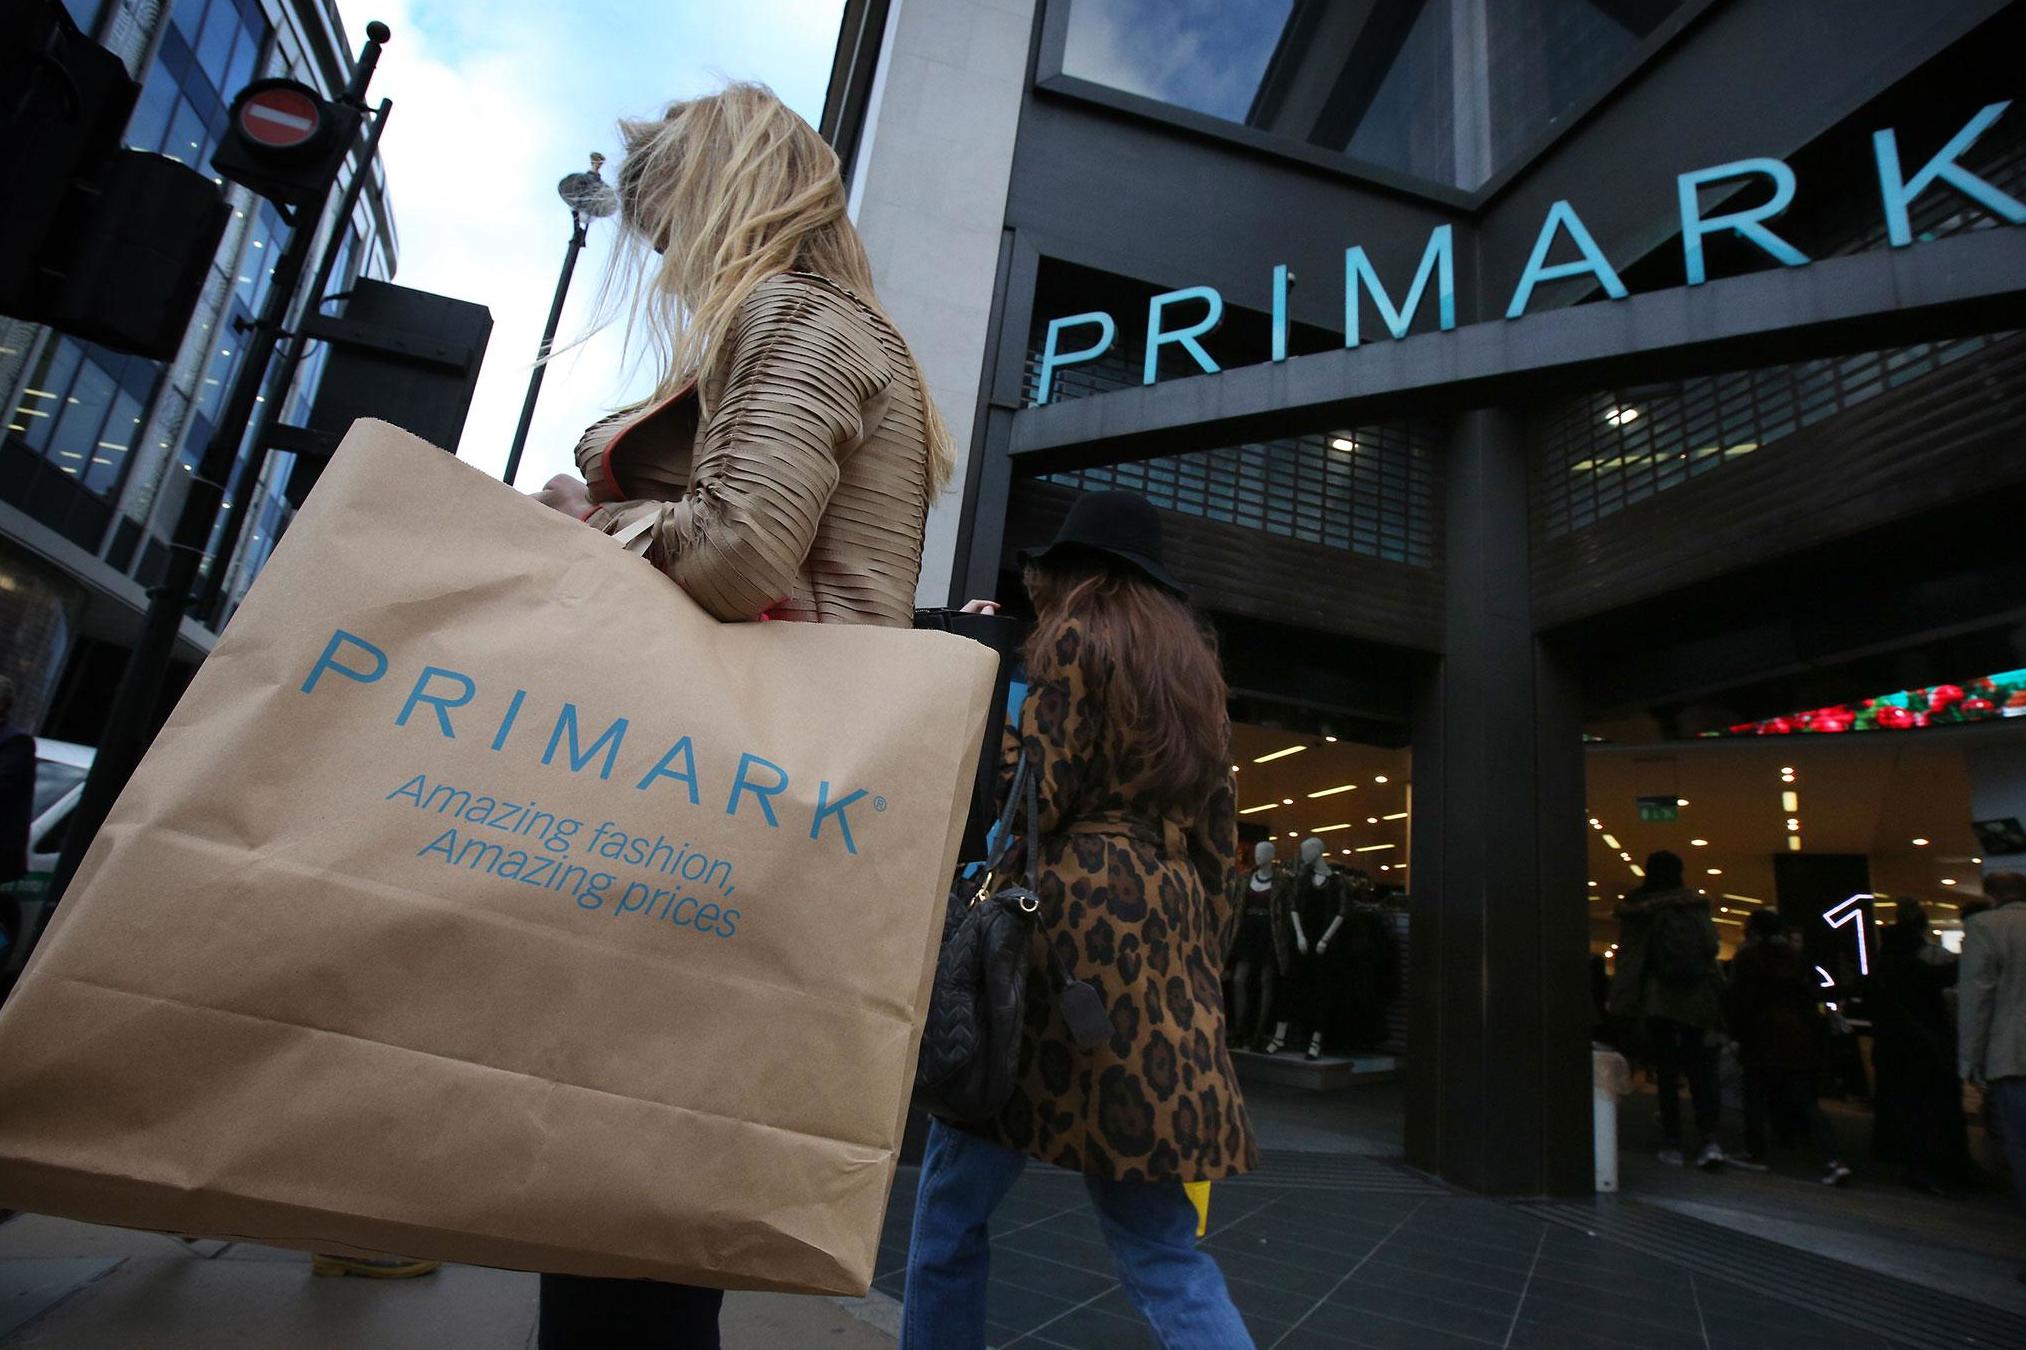 The girls admitted taking the child from a Primark in Newcastle (file photo)